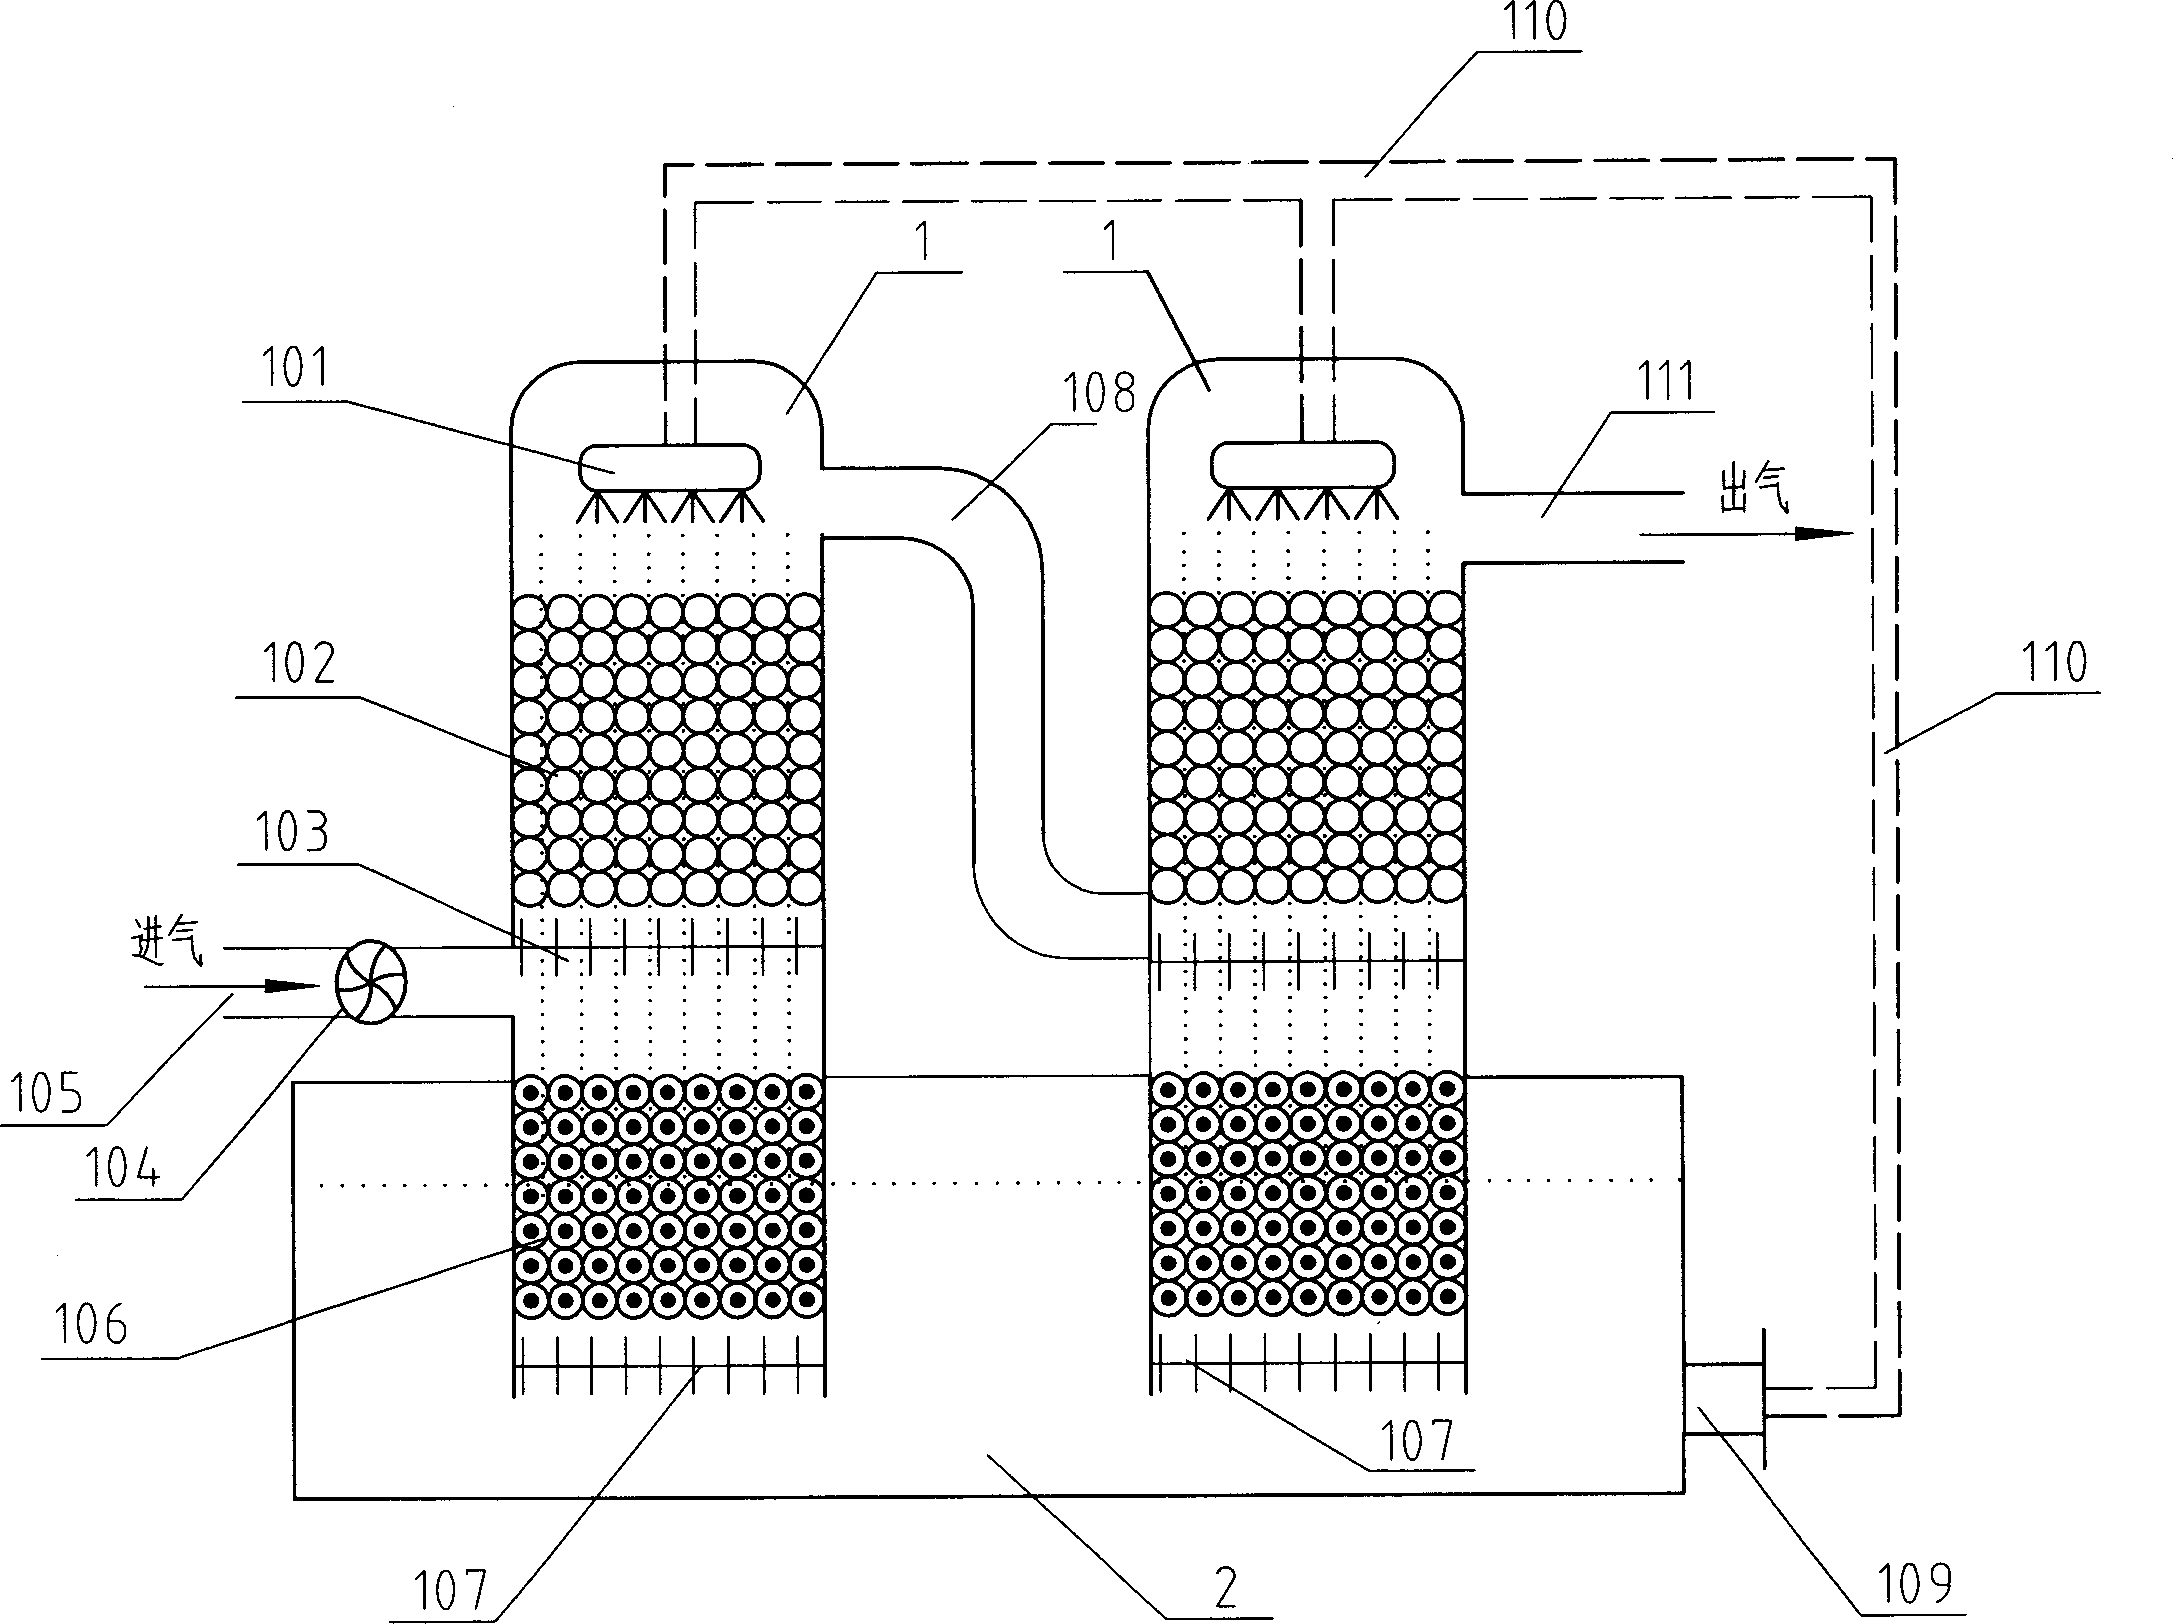 Chlorine leakage absorption device and method